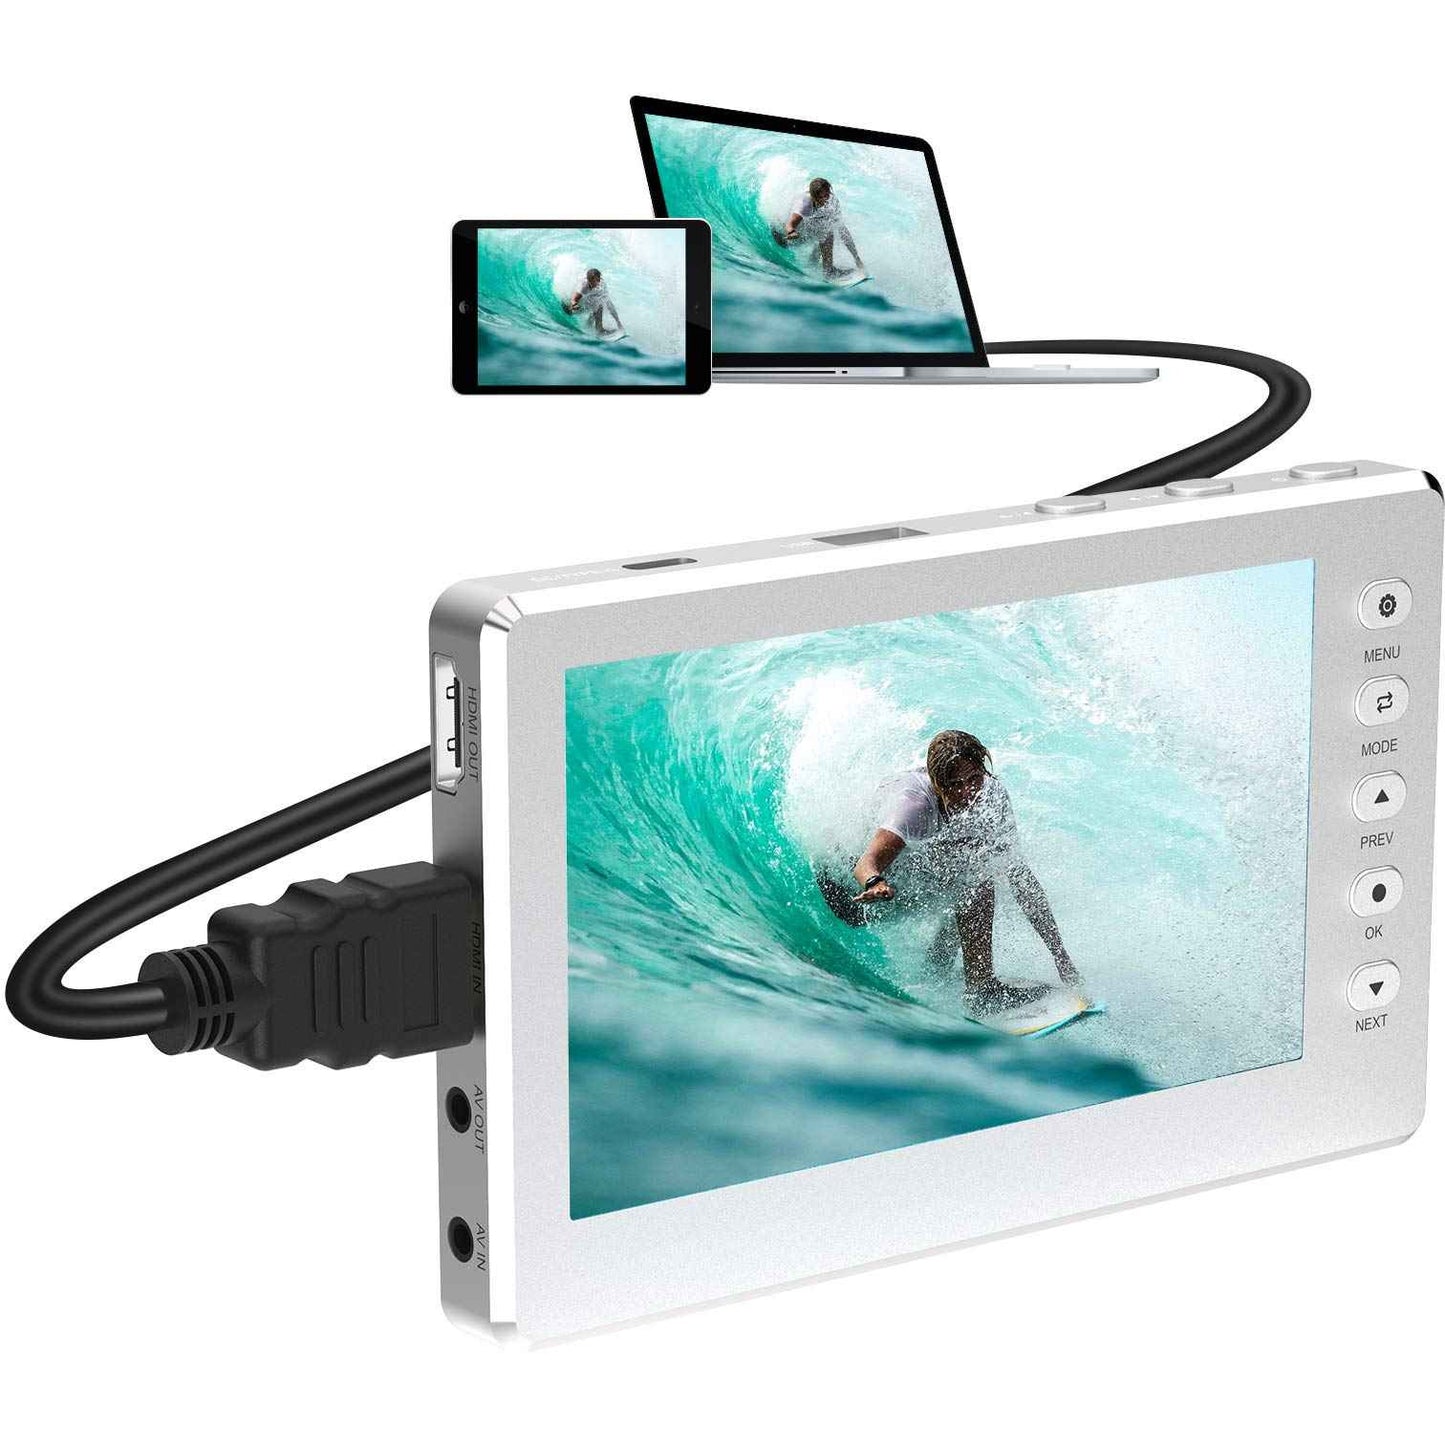 HD Video Capture Box with 5“ screen